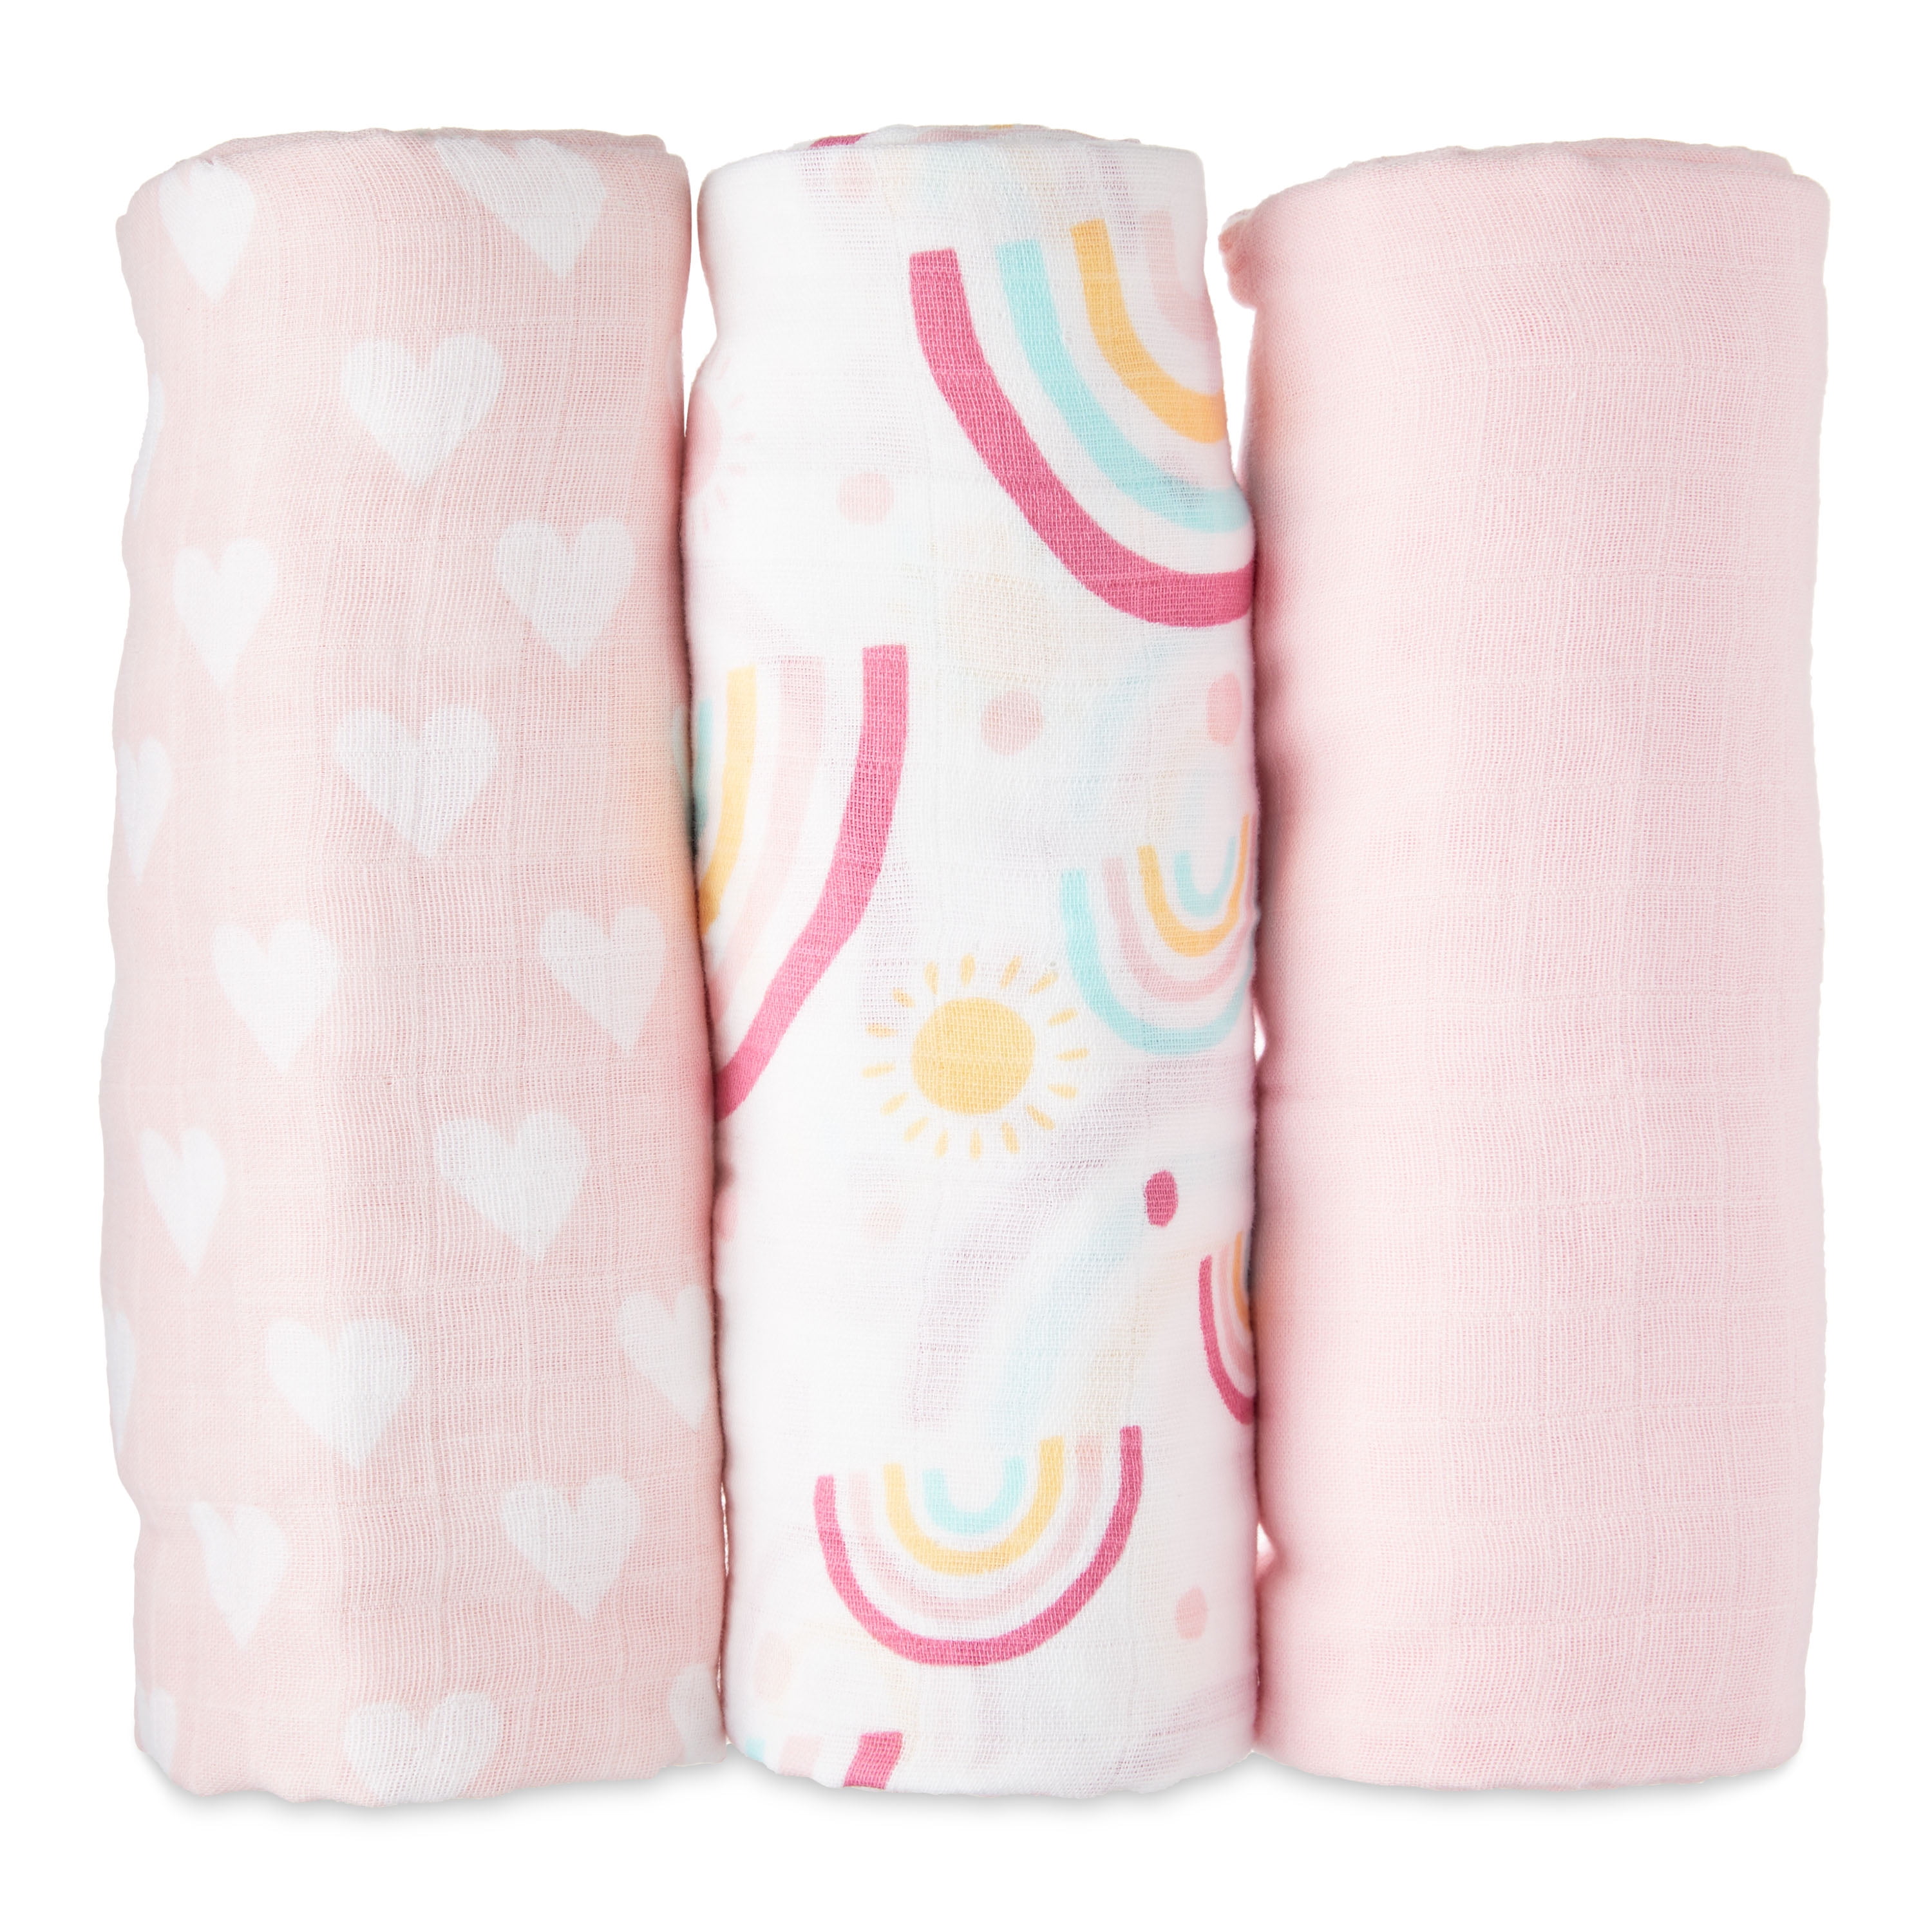 Parent's Choice Muslin Extra Large Swaddle 3pk, Rainbow, Pink and White